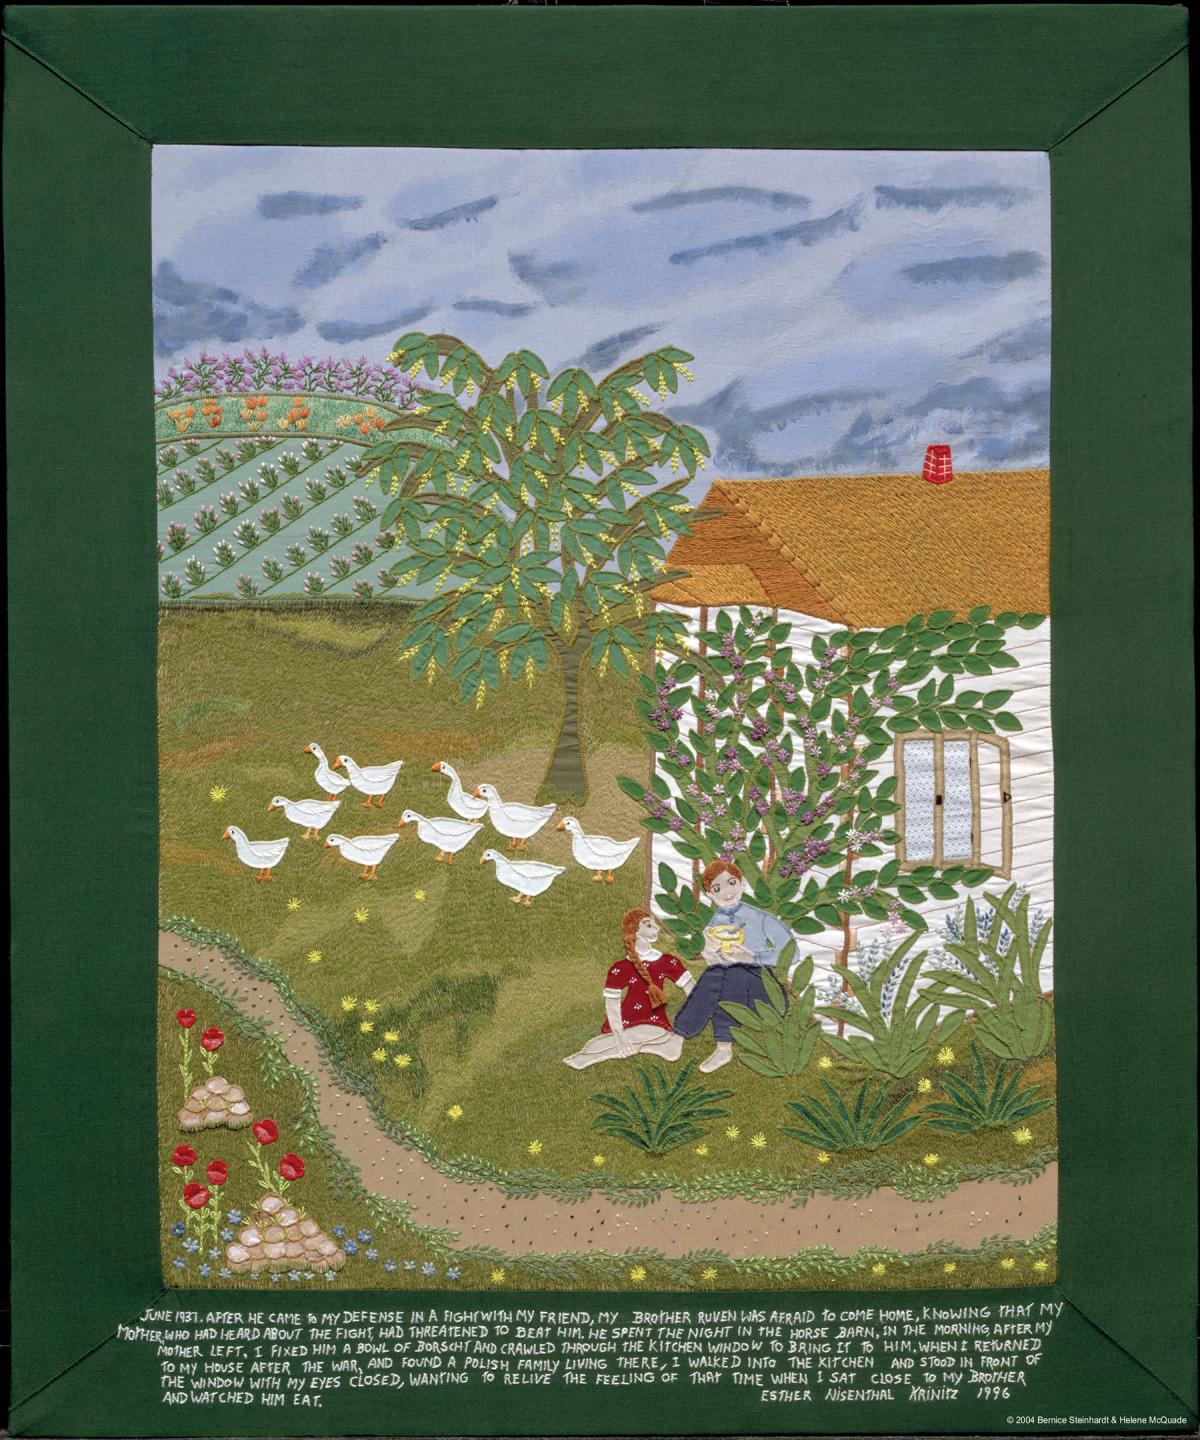 Quilt depicting a young woman and a boy sitting outside in a yard with birds